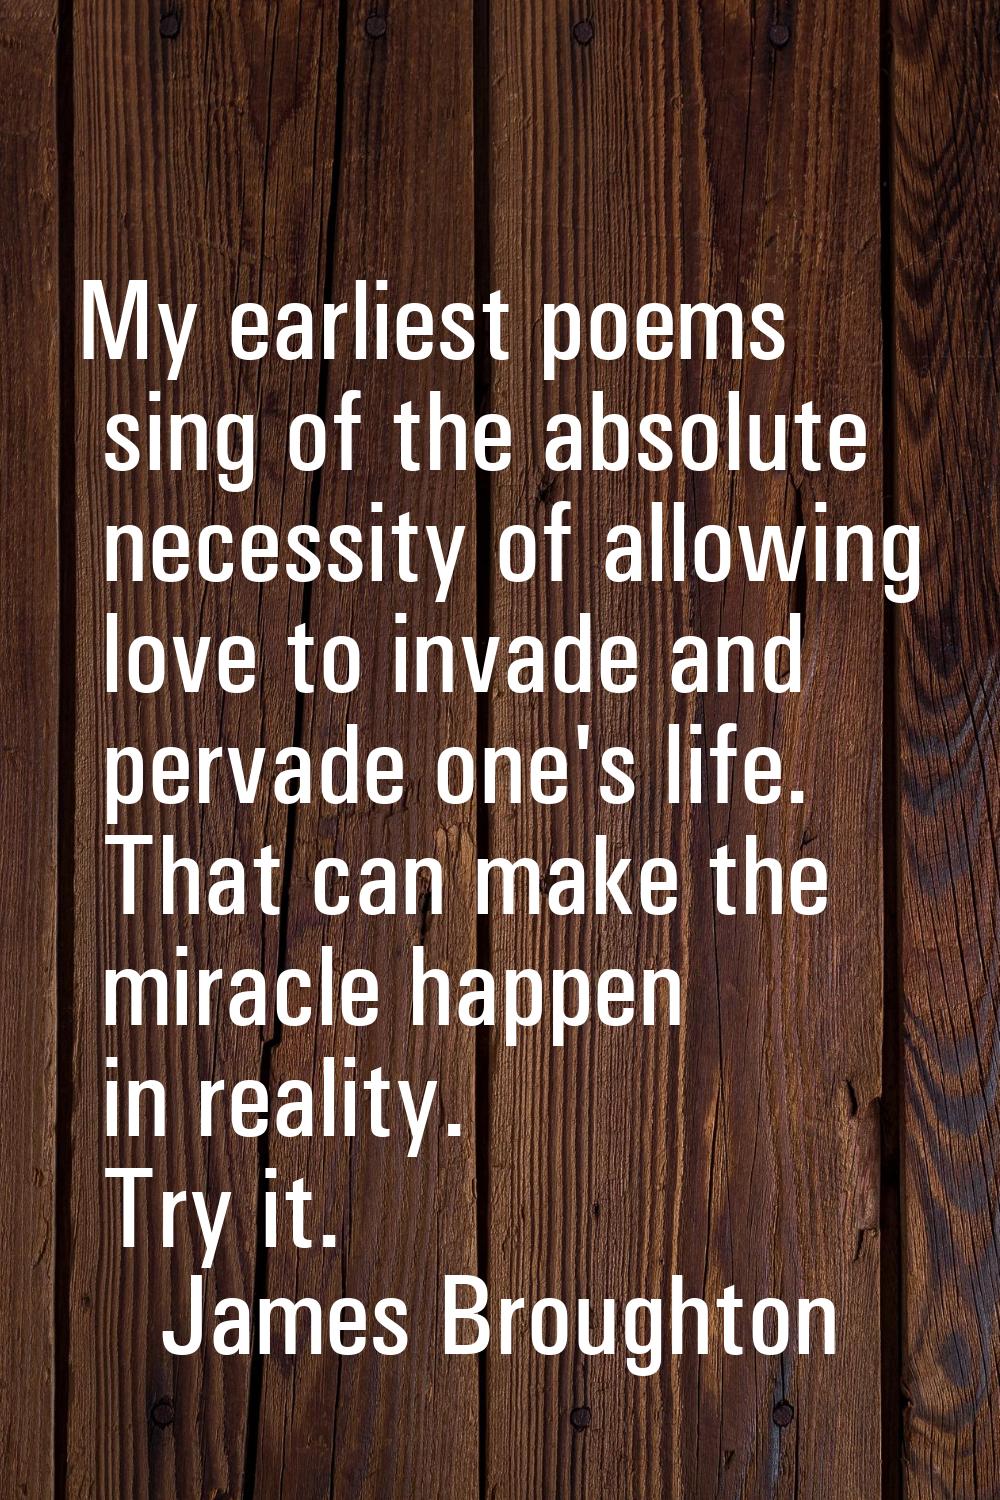 My earliest poems sing of the absolute necessity of allowing love to invade and pervade one's life.